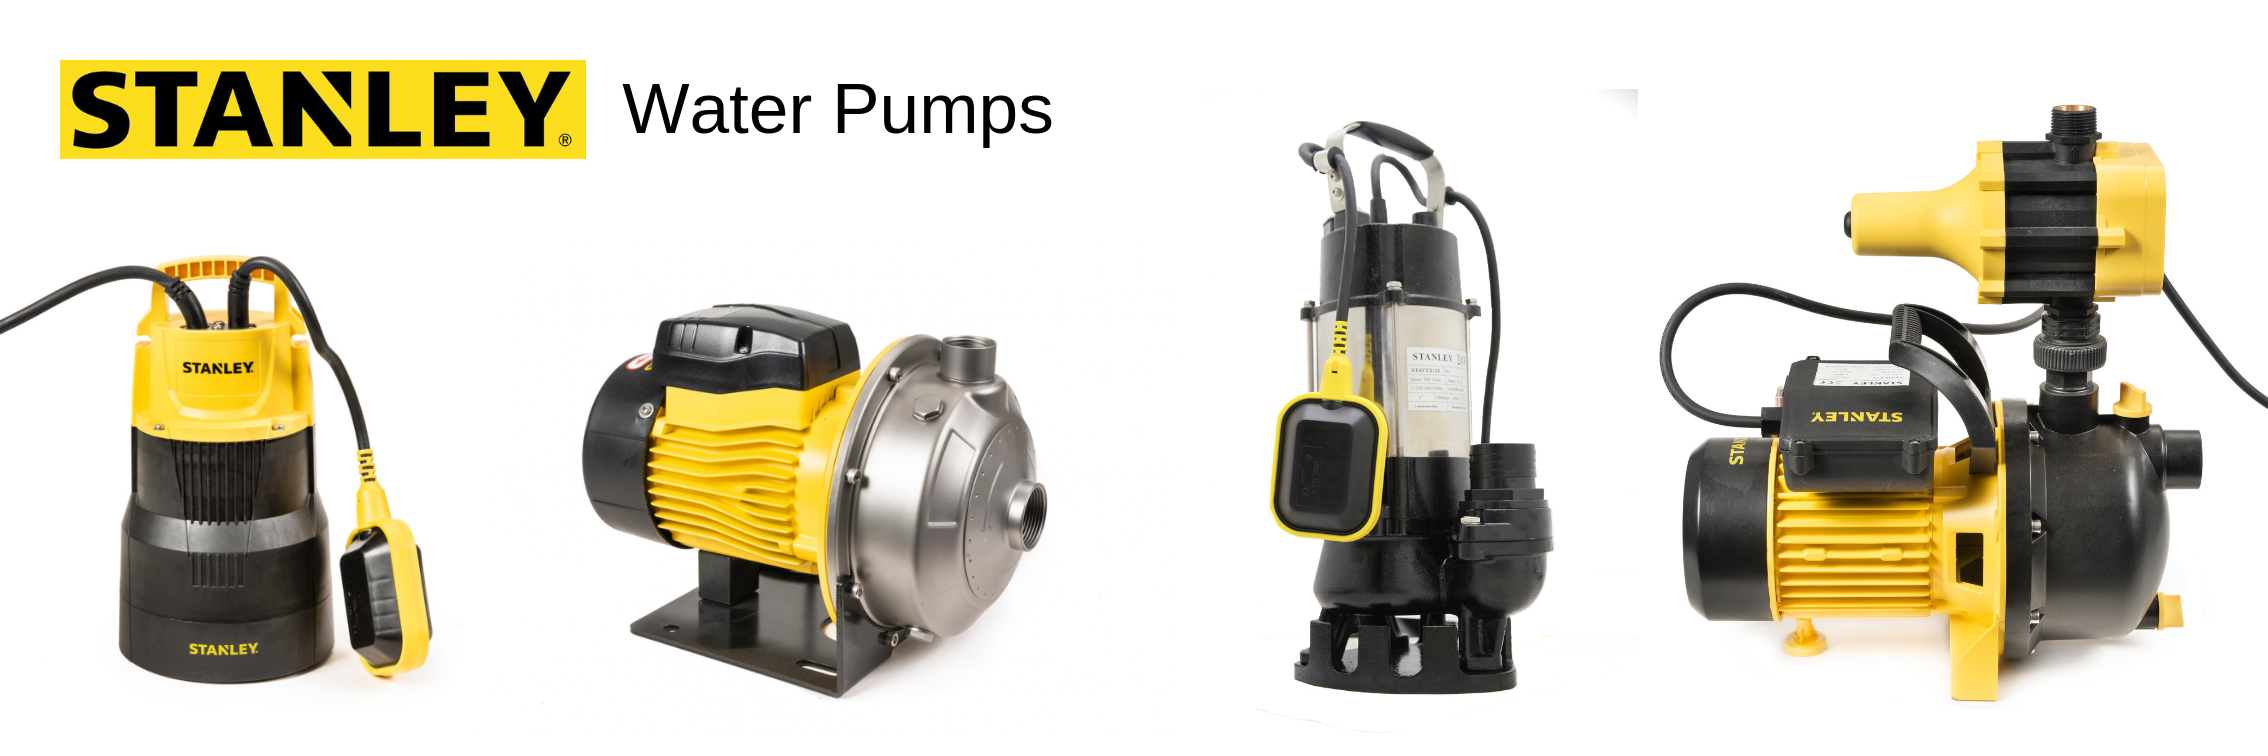 A range of water pumps from Stanley available from Perkinz Farming products